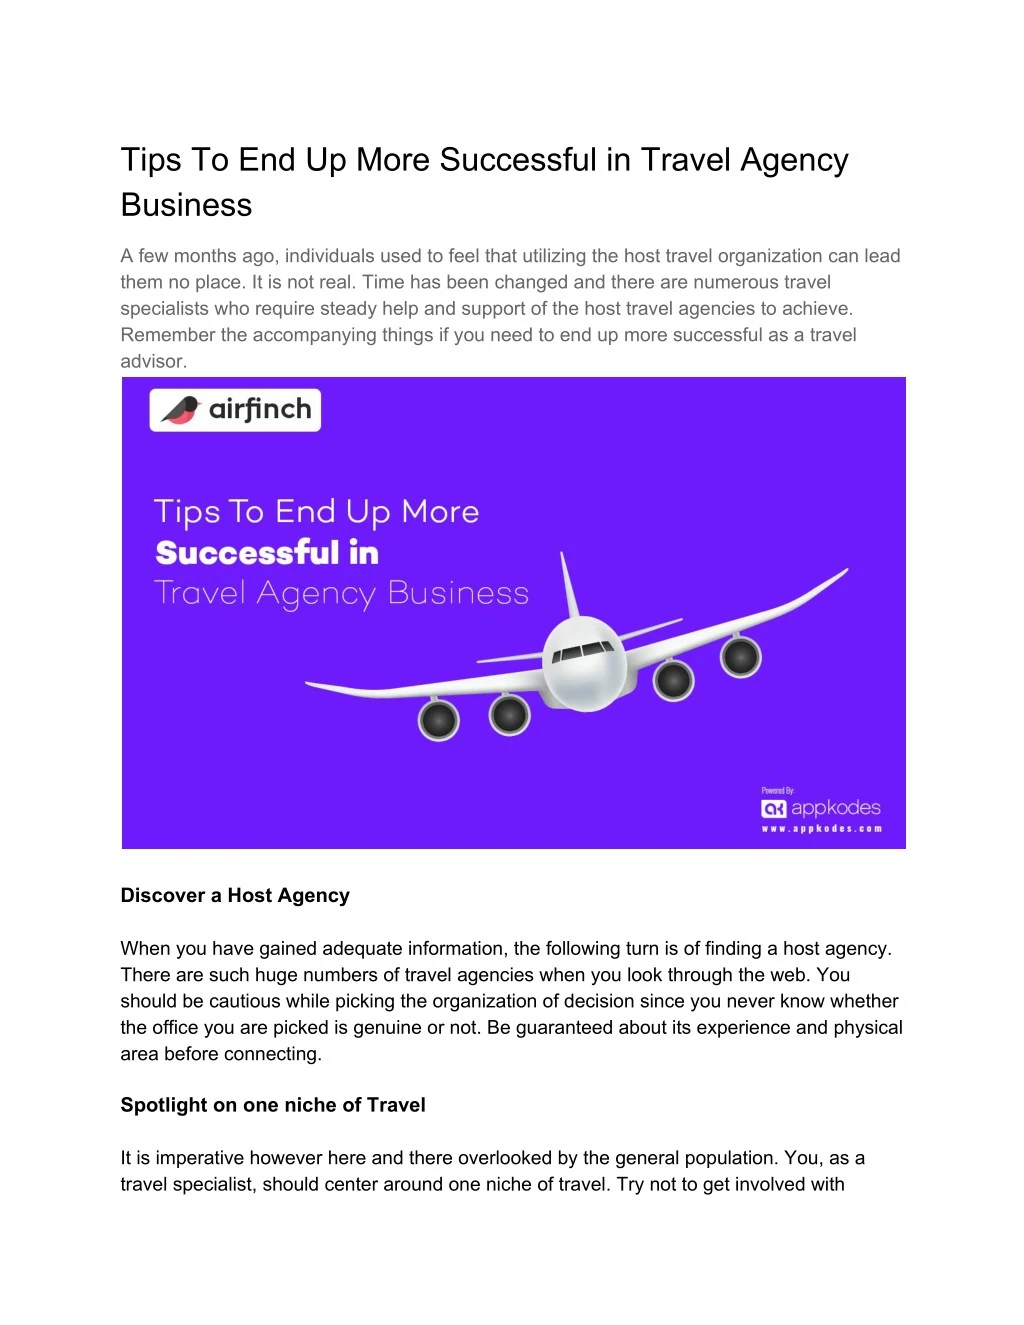 tips to end up more successful in travel agency